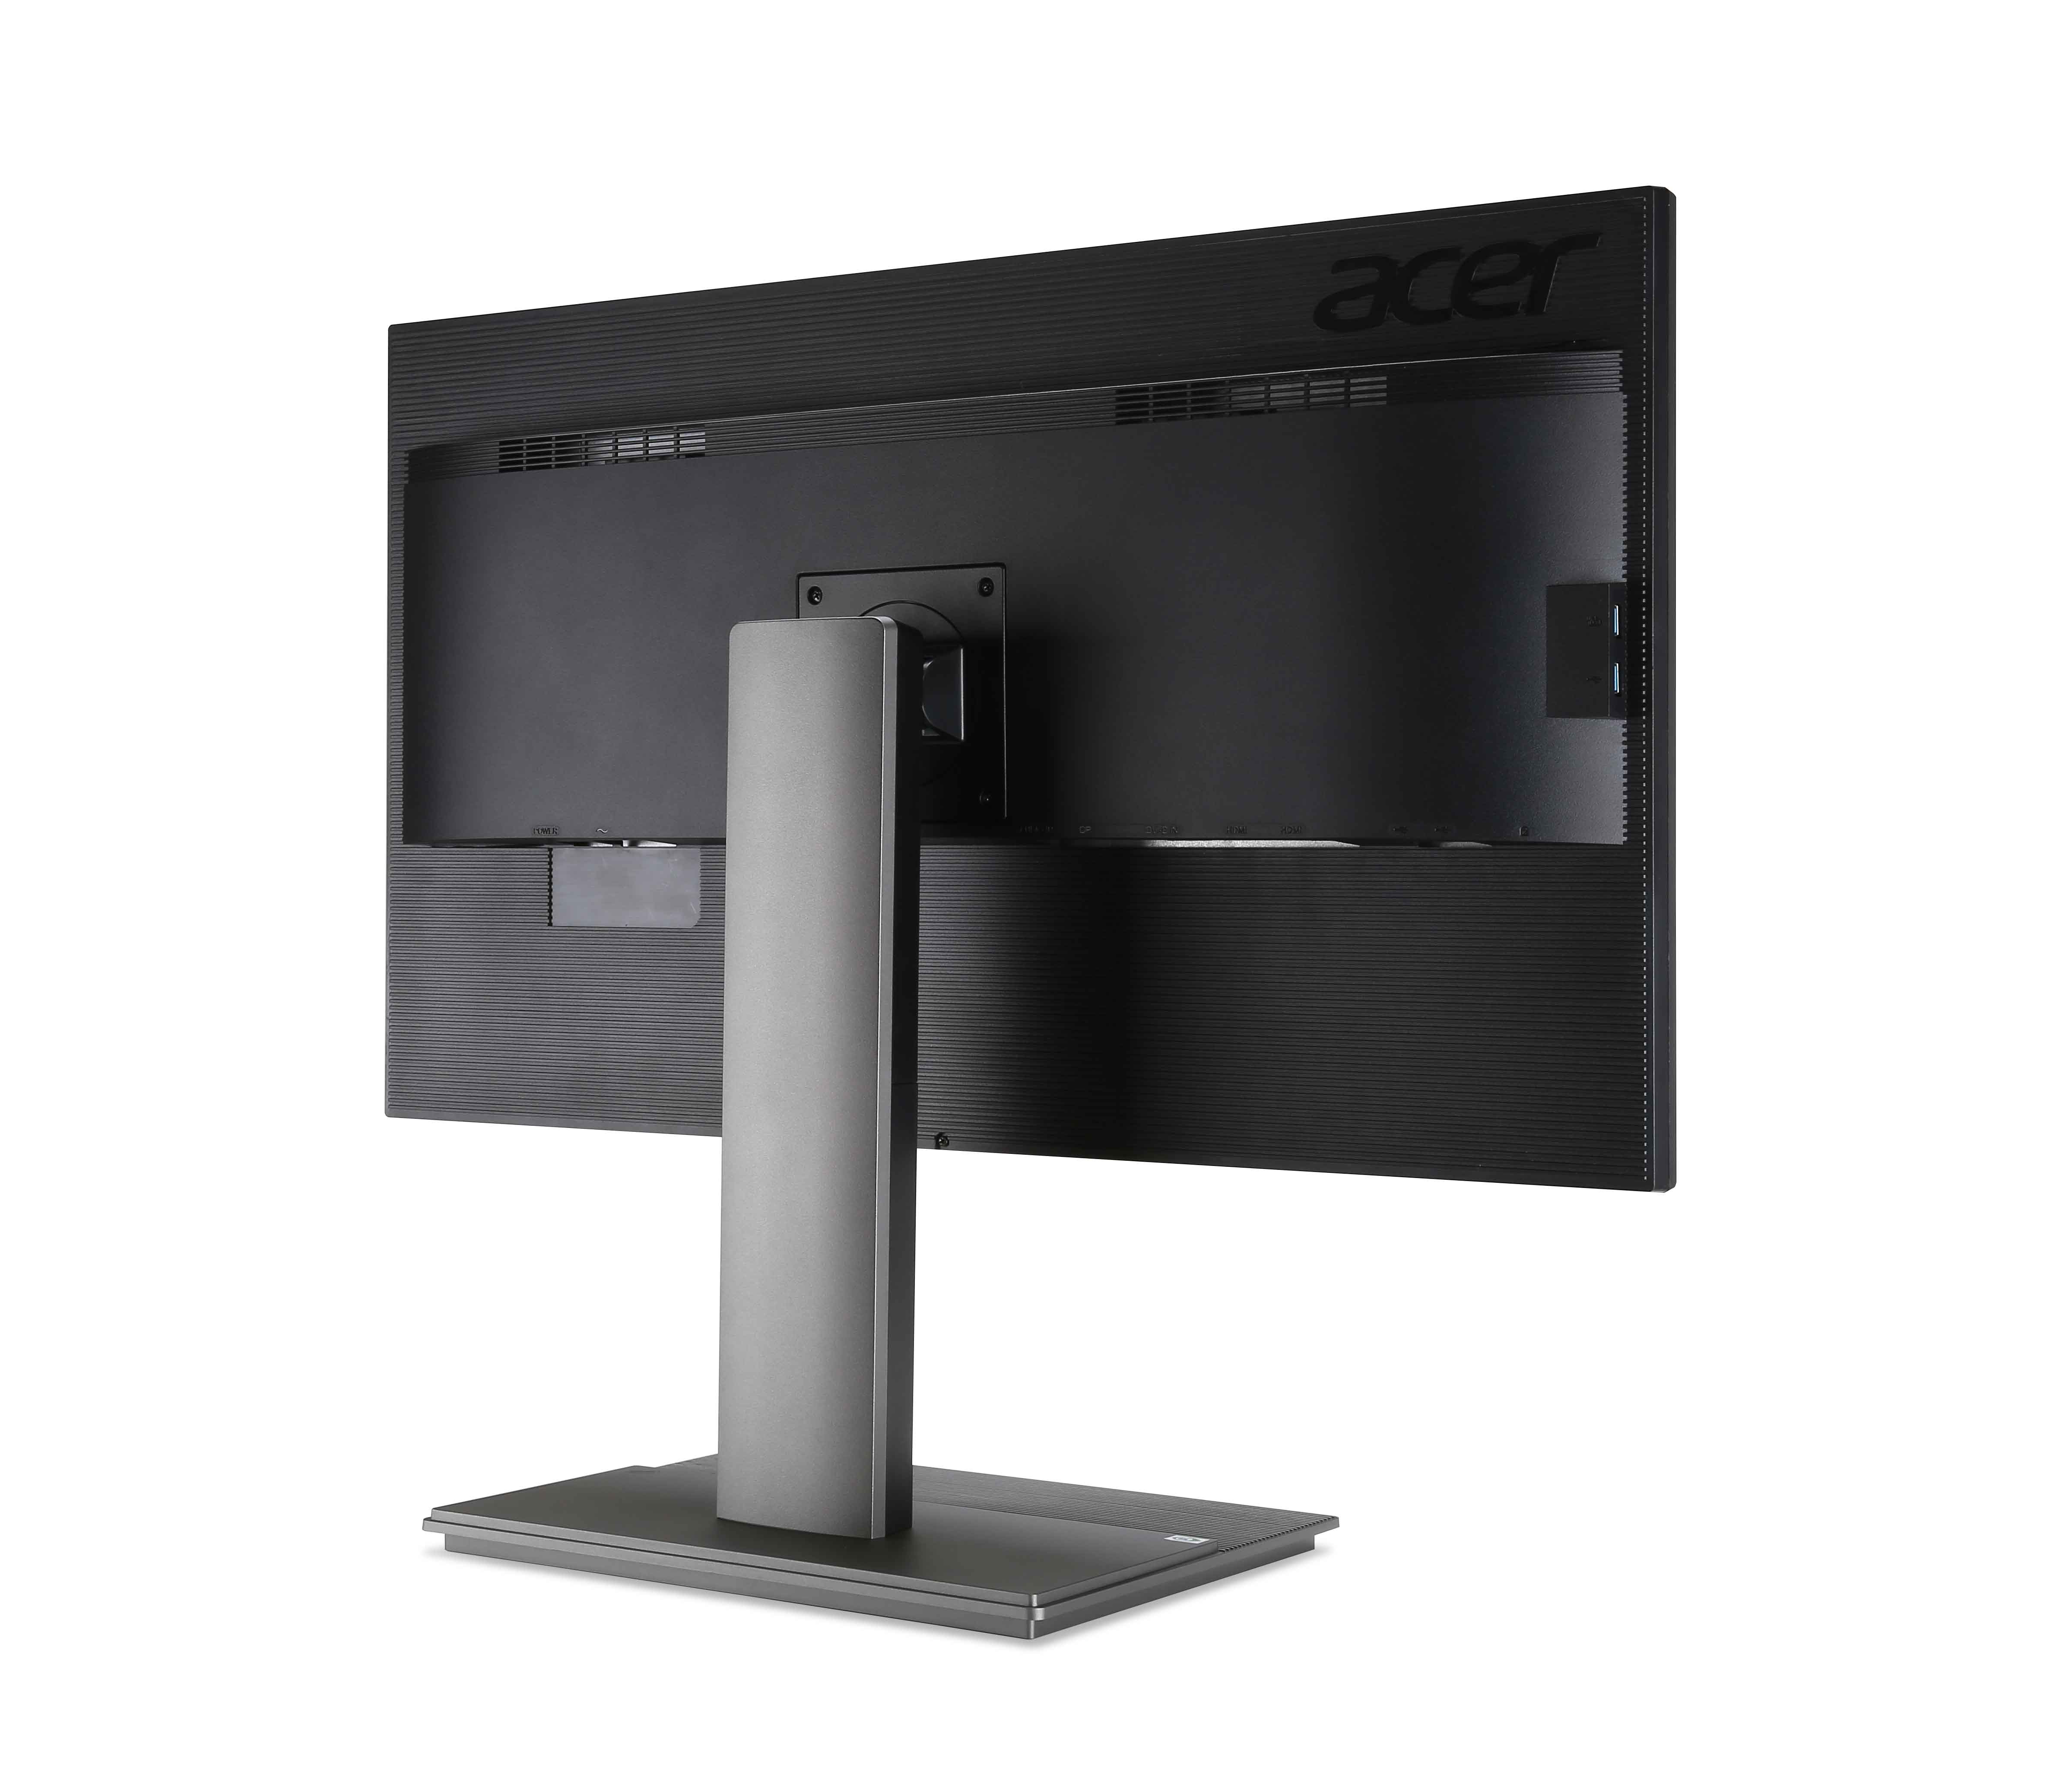 The high pixel density delivers images with excellent detail, making it perfect for advanced HD productivity and multimedia applications such as video, photo and presentation editing.